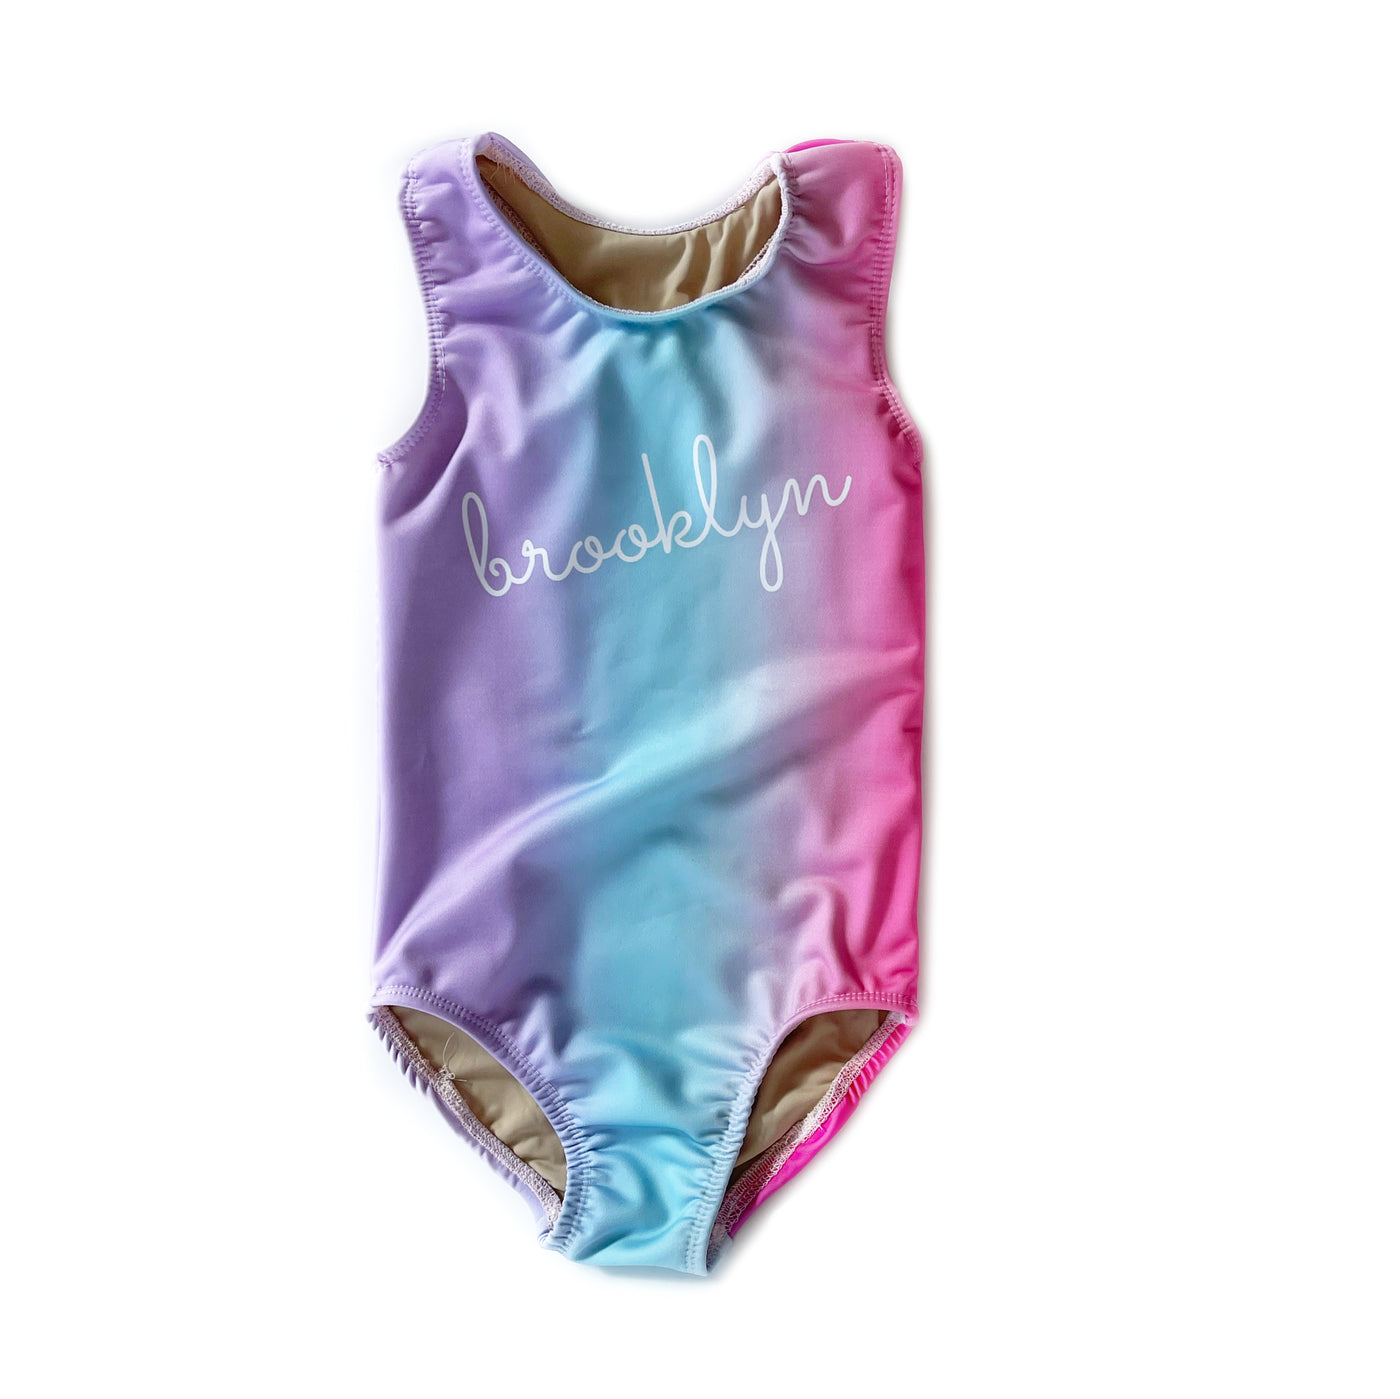 One Name Swimsuit